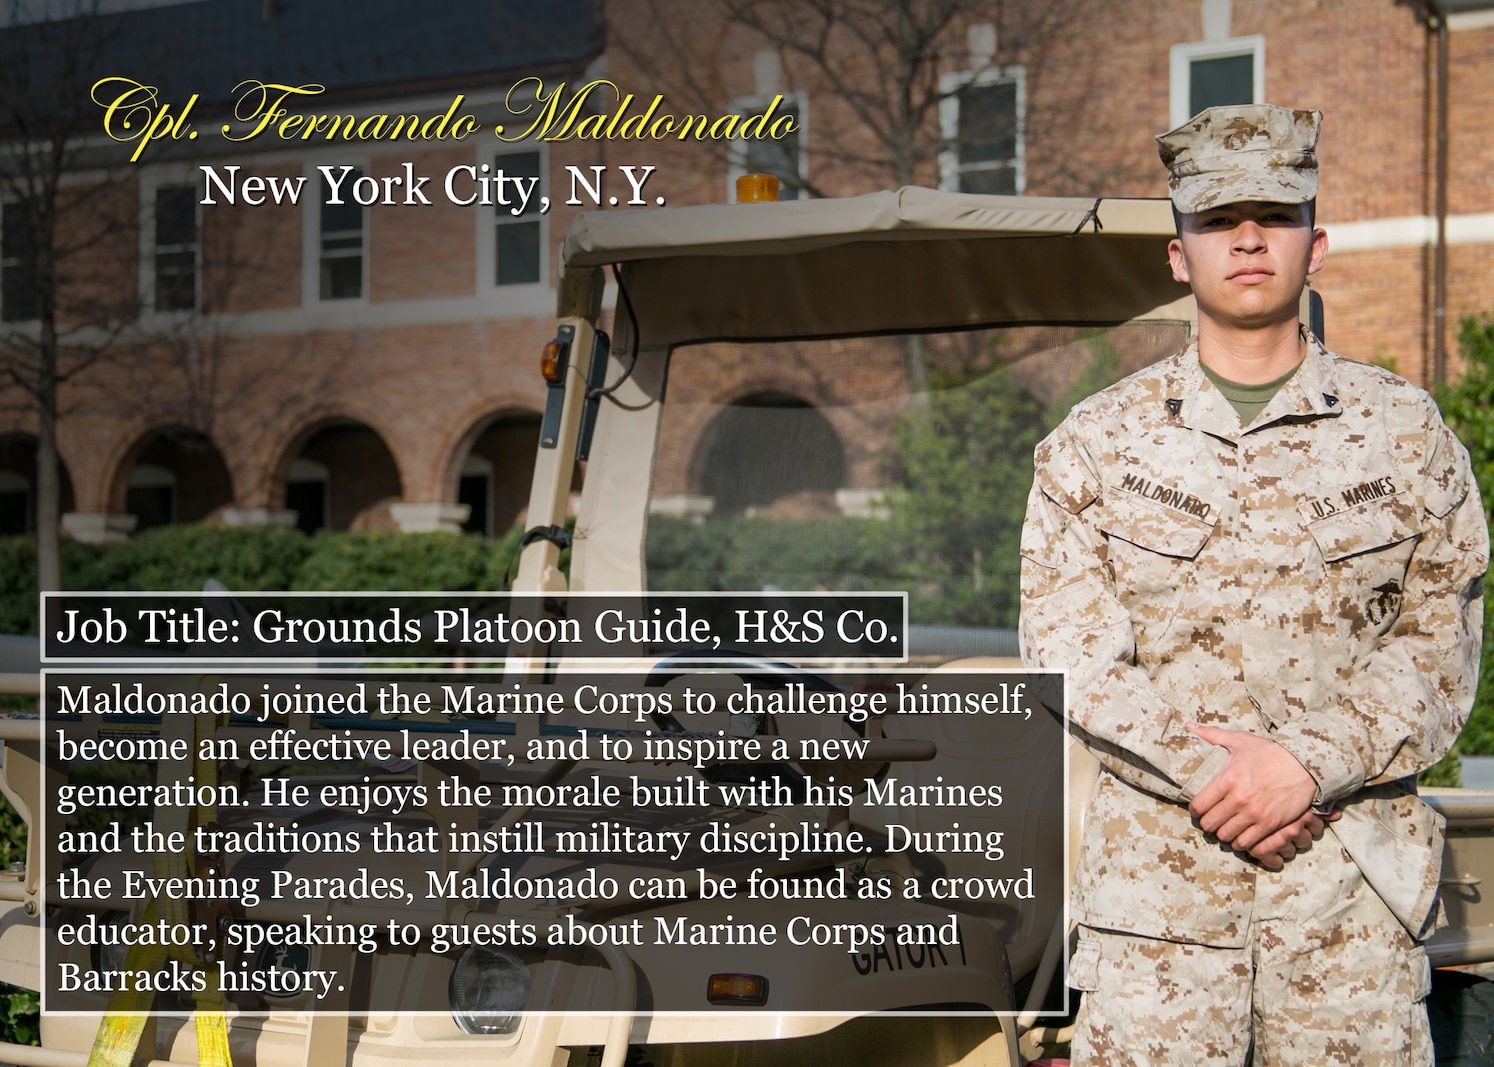 Cpl. Fernando Maldonado
New York City, N.Y.
Job Title: Grounds Platoon Guide, H&S Co.
Maldonado joined the Marine Corps to challenge himself, become an effective leader, and to inspire a new generation. He enjoys the morale built with his Marines and the traditions that instill military discipline. During the Evening Parades, Maldonado can be found as a crowd educator, speaking to guests about Marine Corps and Barracks history.
(Official Marine Corps graphic by Cpl. Chi Nguyen/Released)